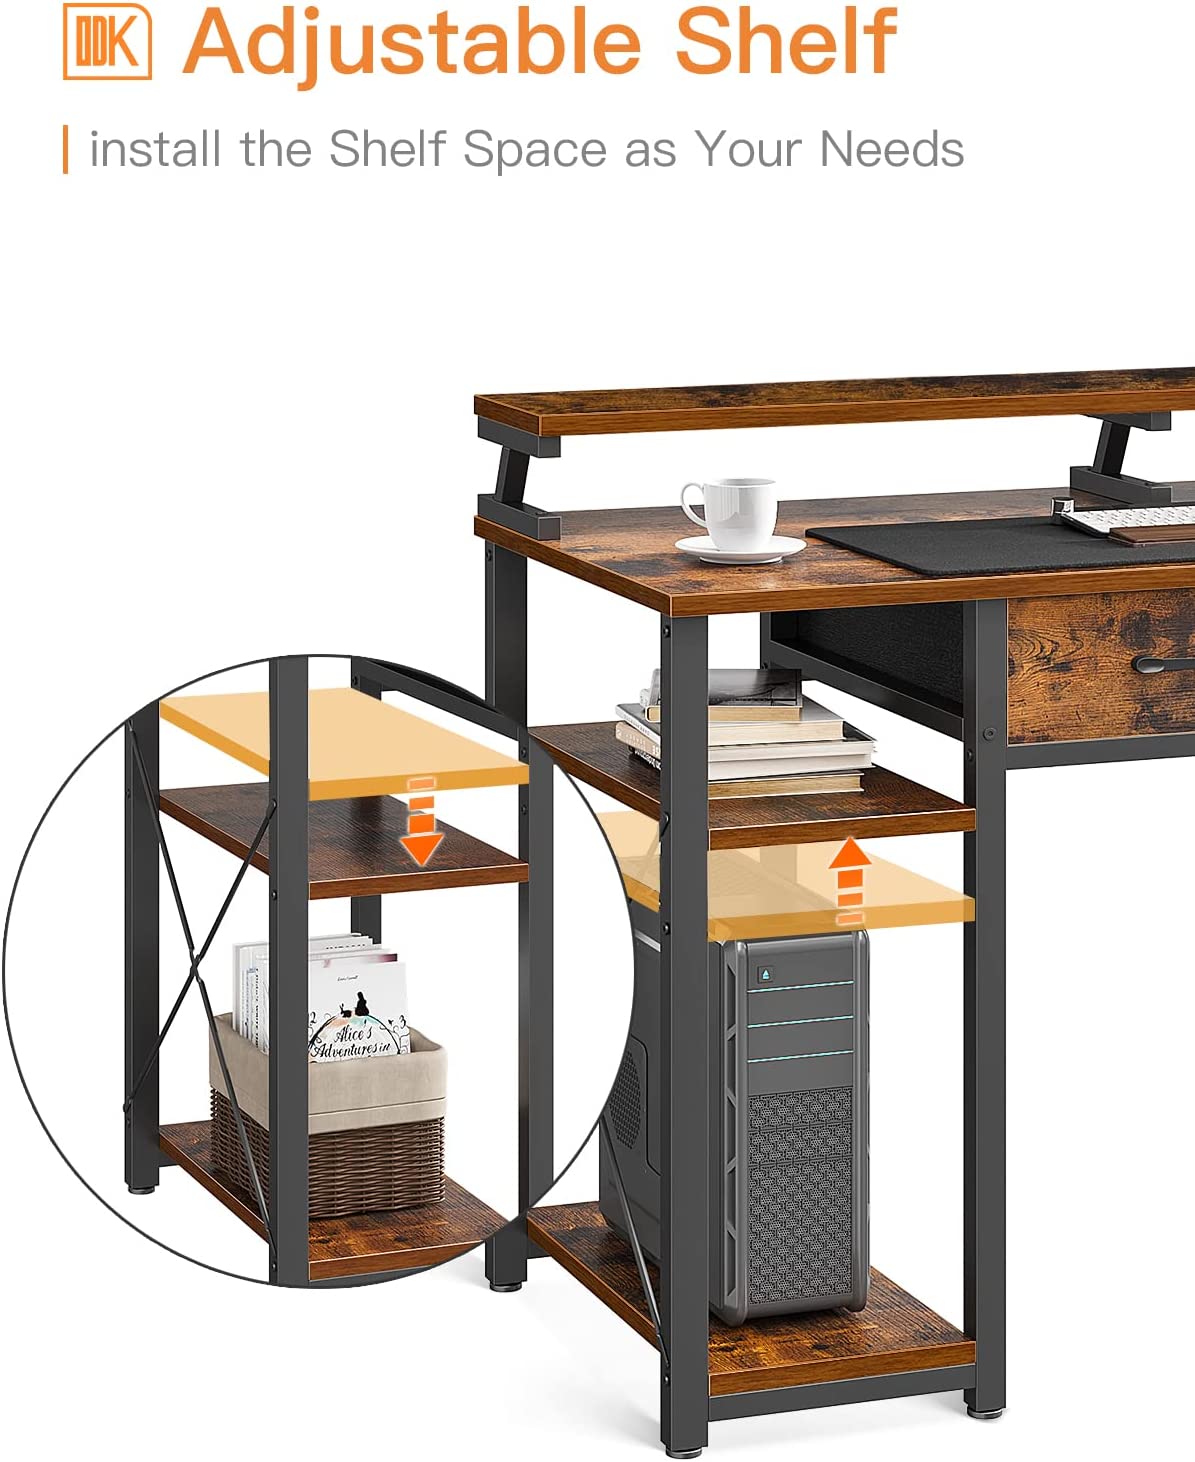 47 Inch Computer Desk with Drawers and Storage Shelves